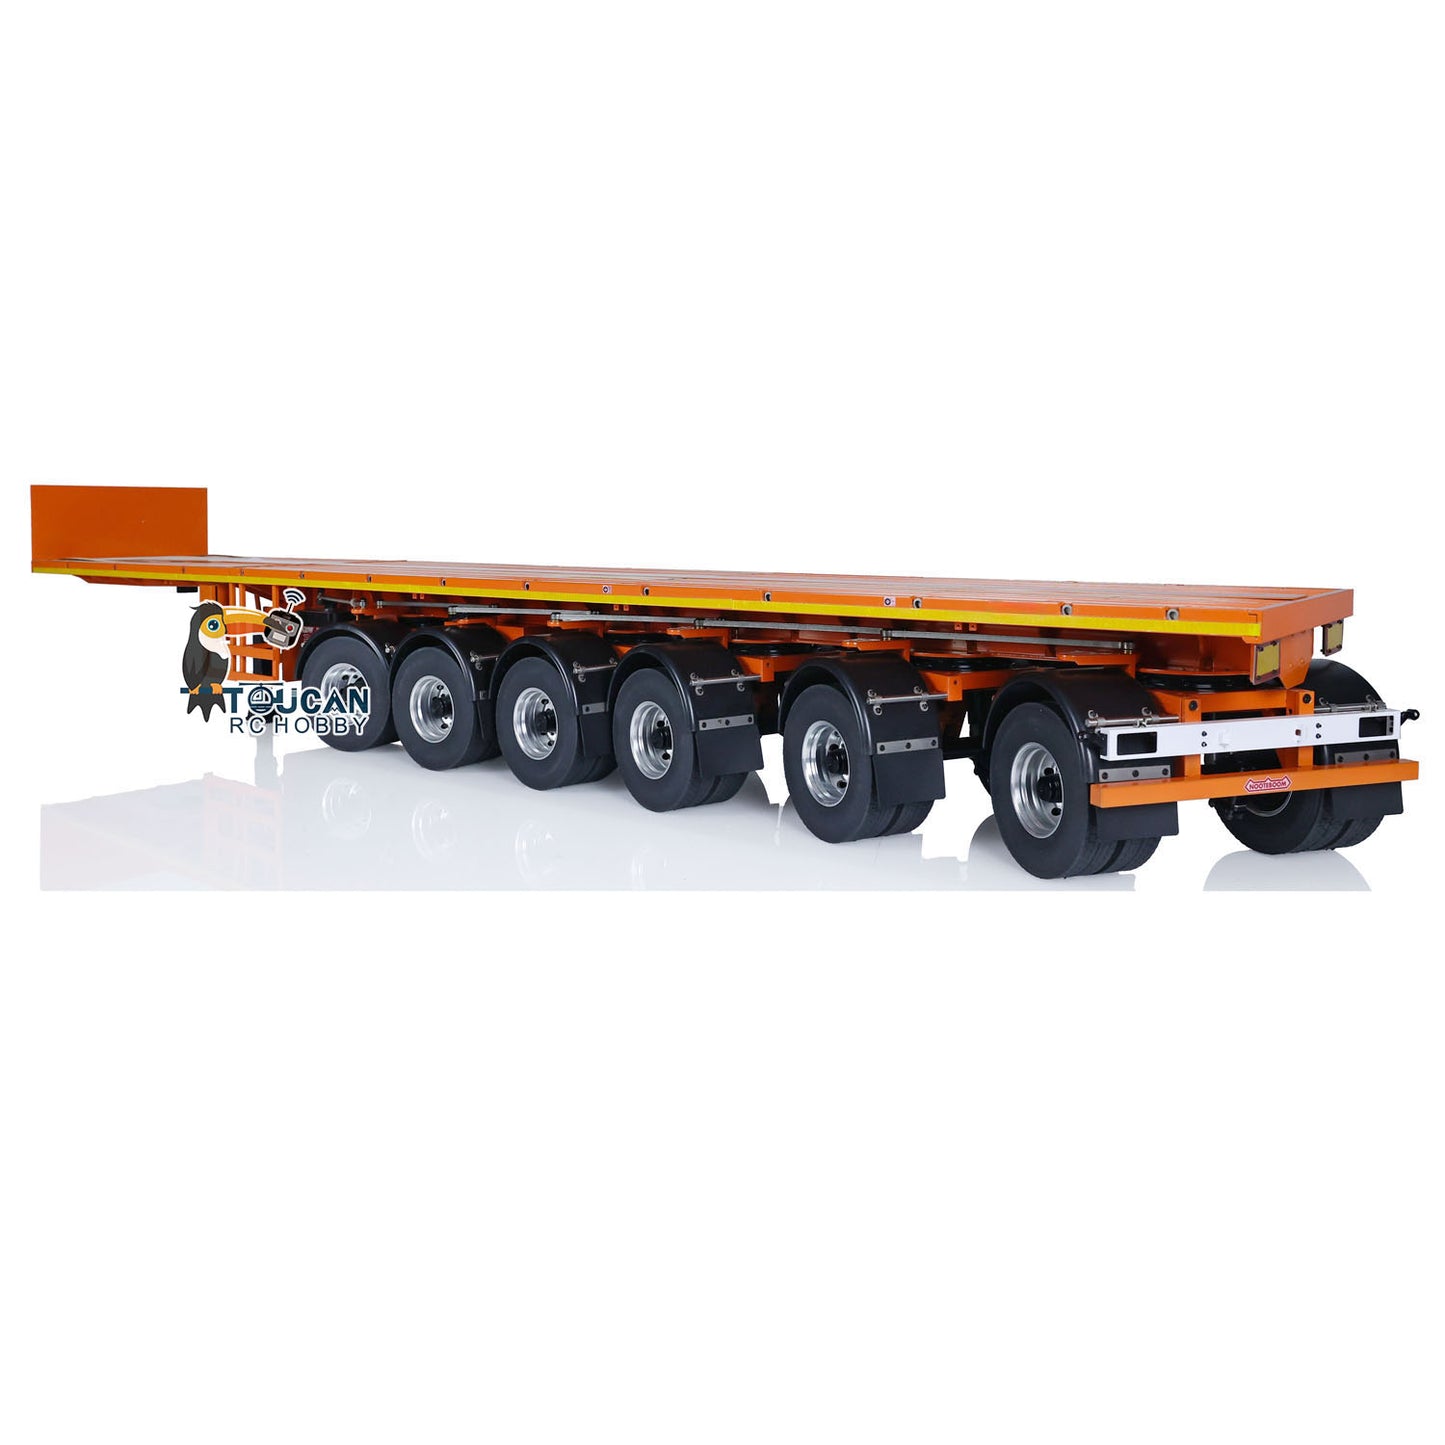 NOOXION 1/14 6 Axles Metal Flat Trailer for Remote Controlled Tractor Truck RC Electric Car Hobby Model DIY Parts